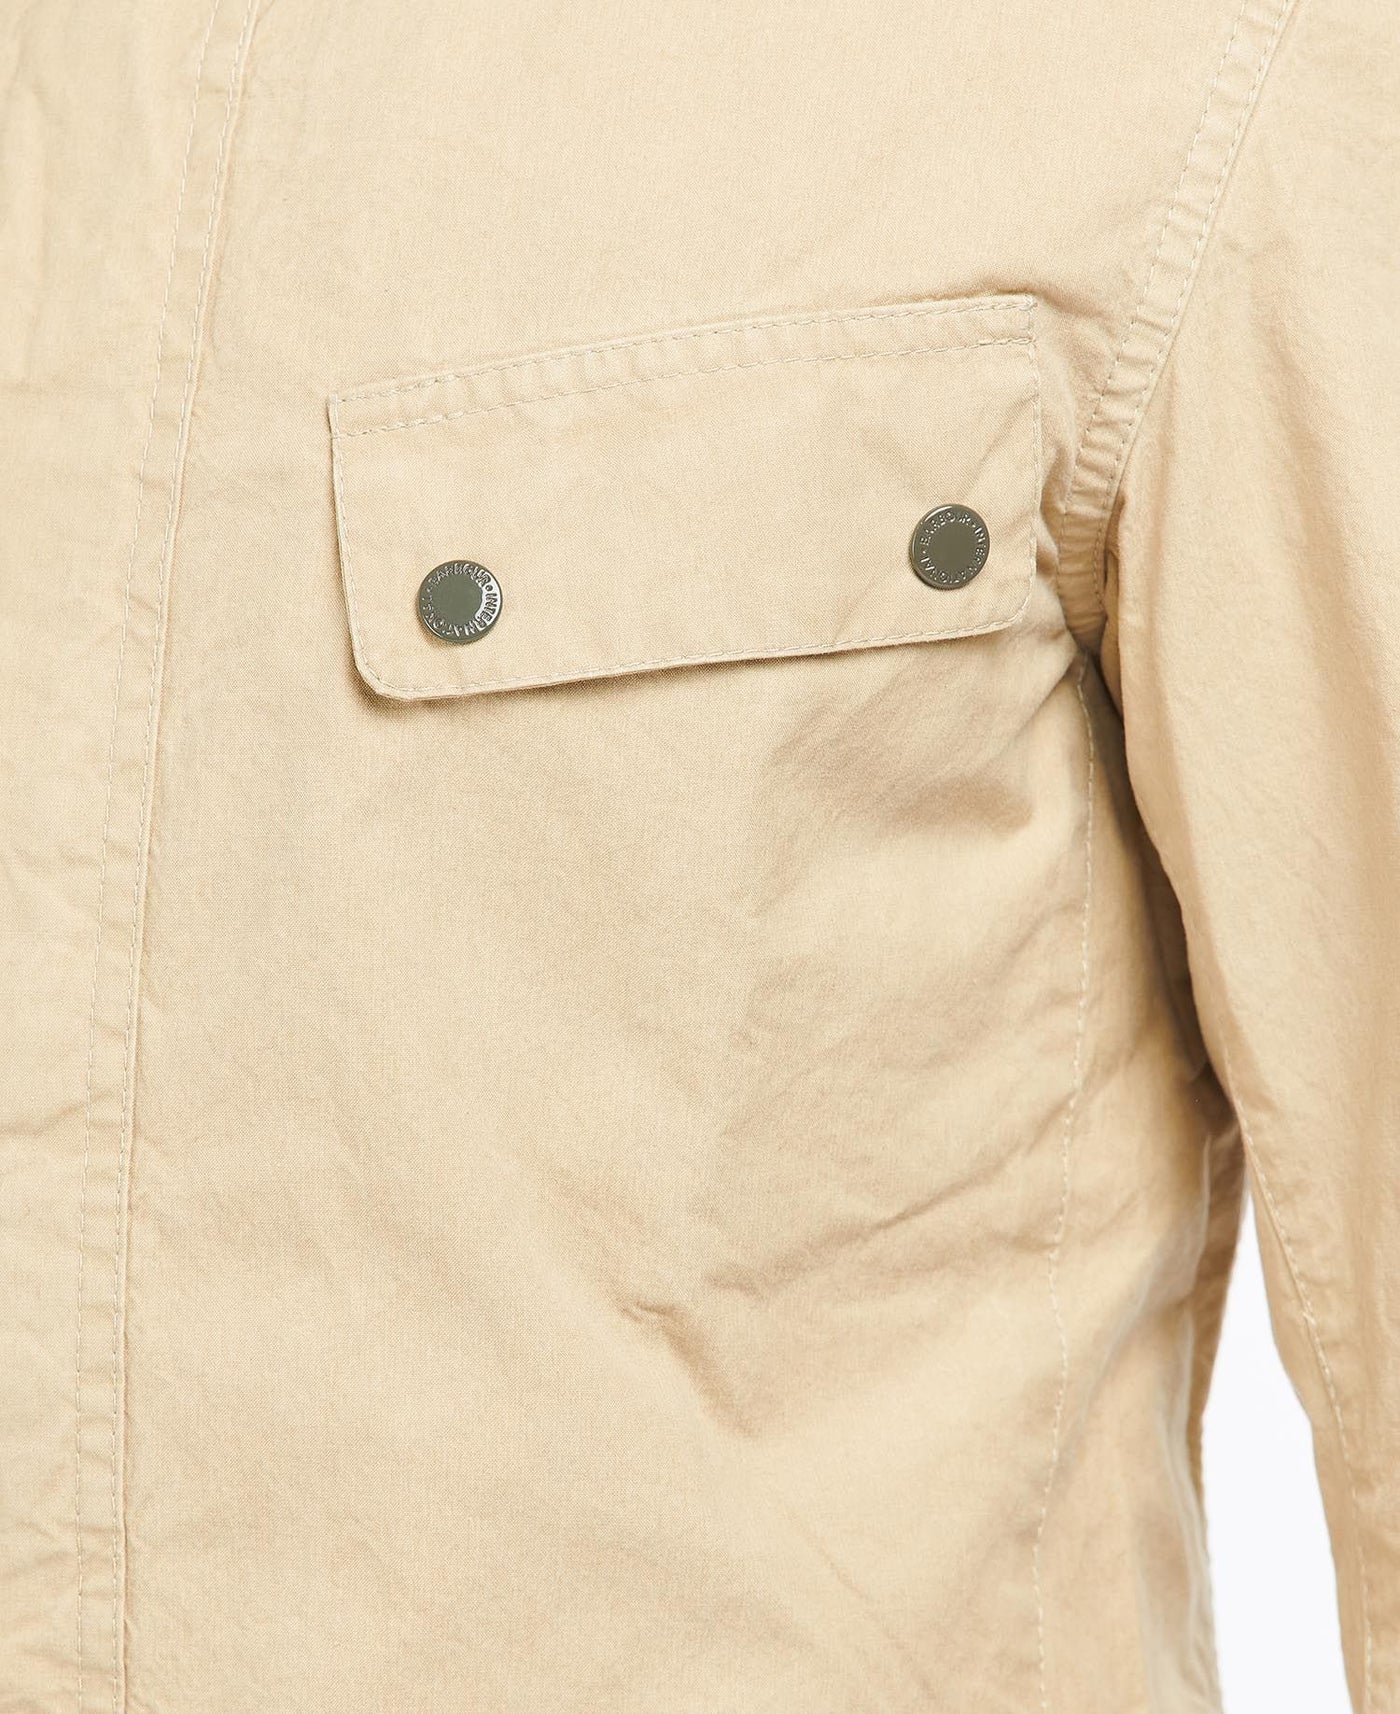 Barbour Summer Wash Casual Outerwear